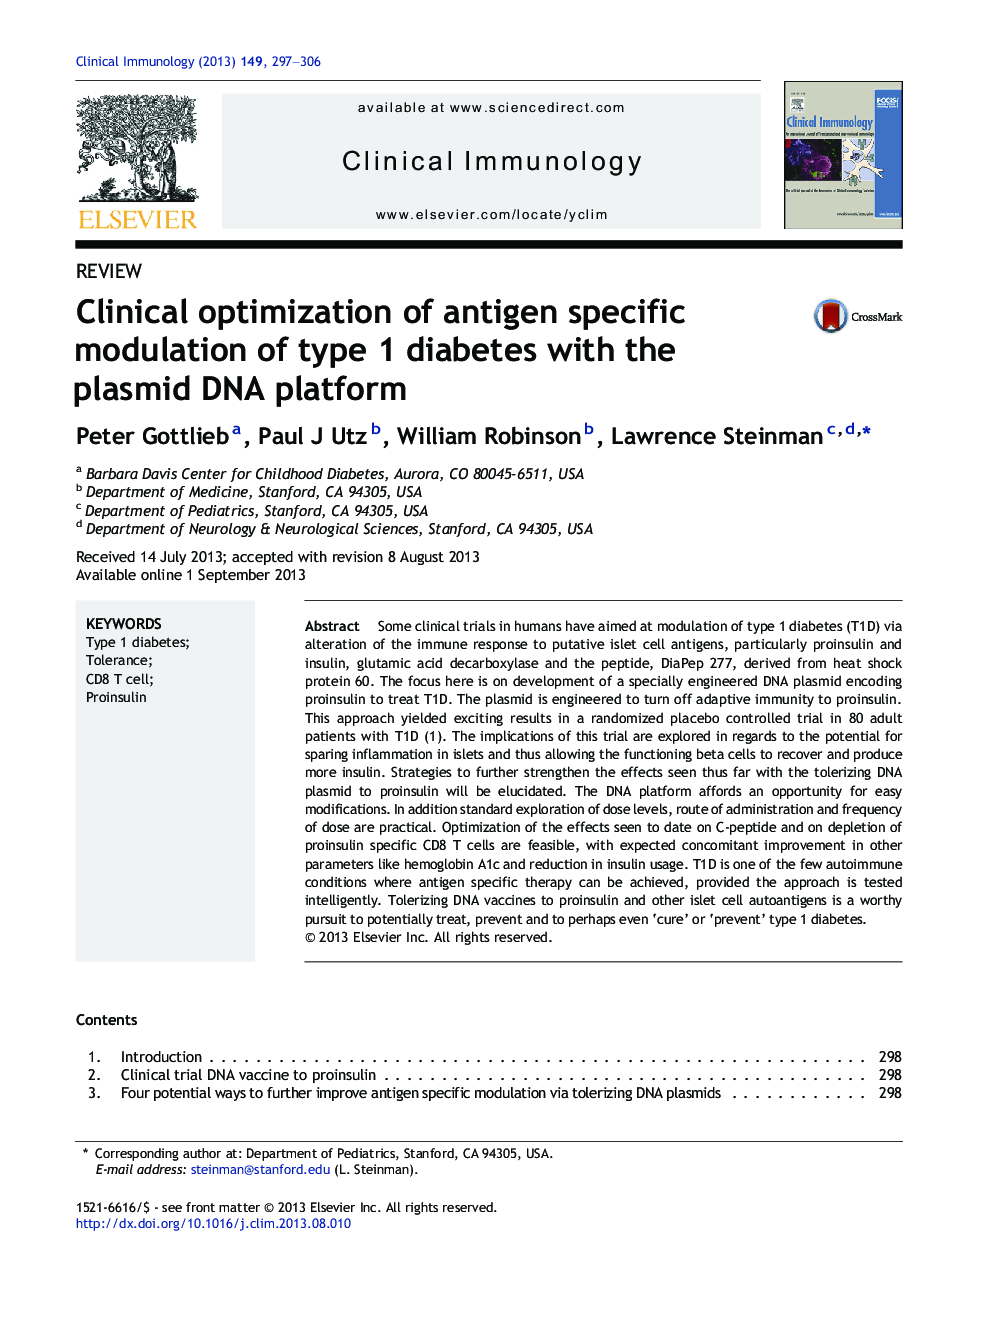 Clinical optimization of antigen specific modulation of type 1 diabetes with the plasmid DNA platform